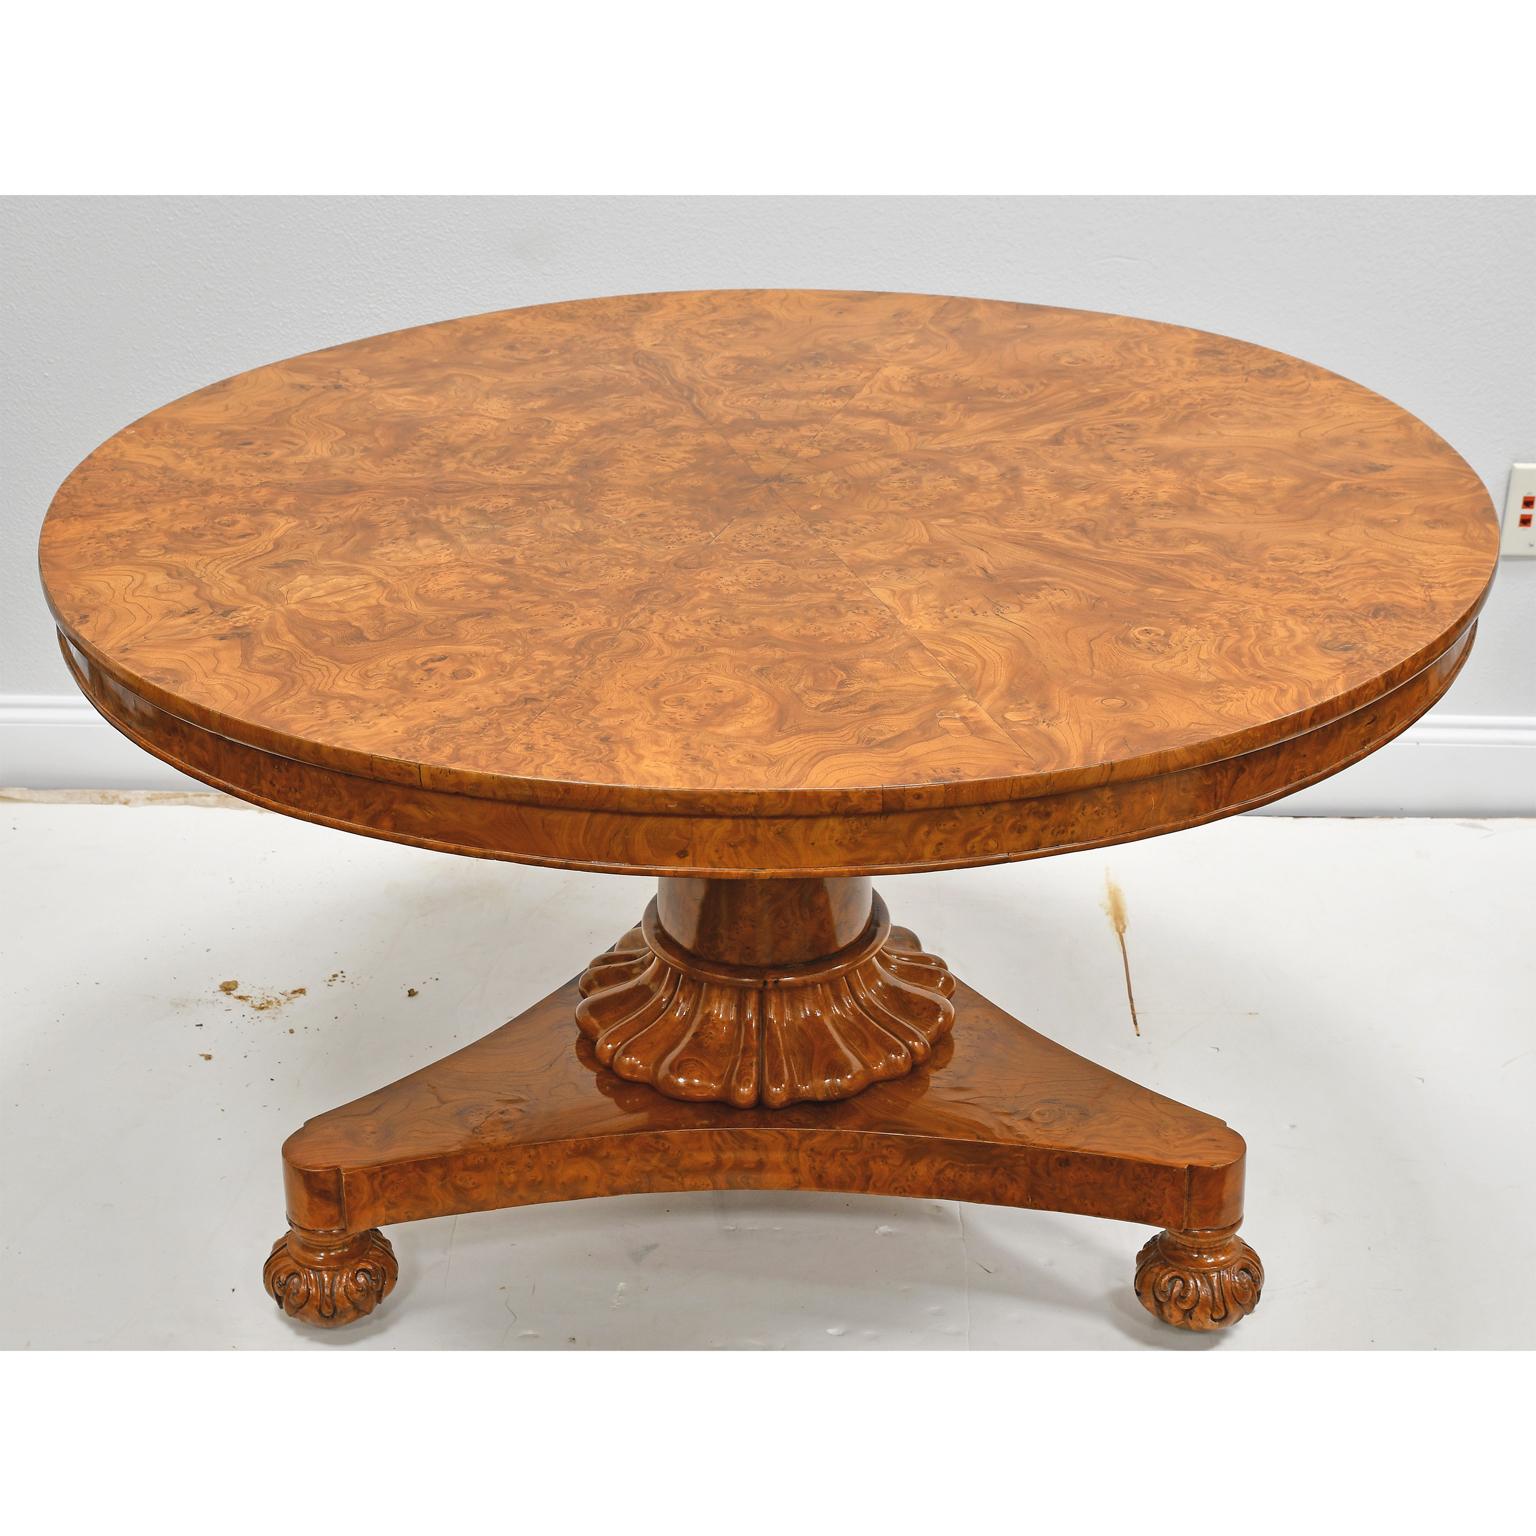 Hand-Carved Antique English William IV Round Center or Loo Table in Burl Ash on Pedestal